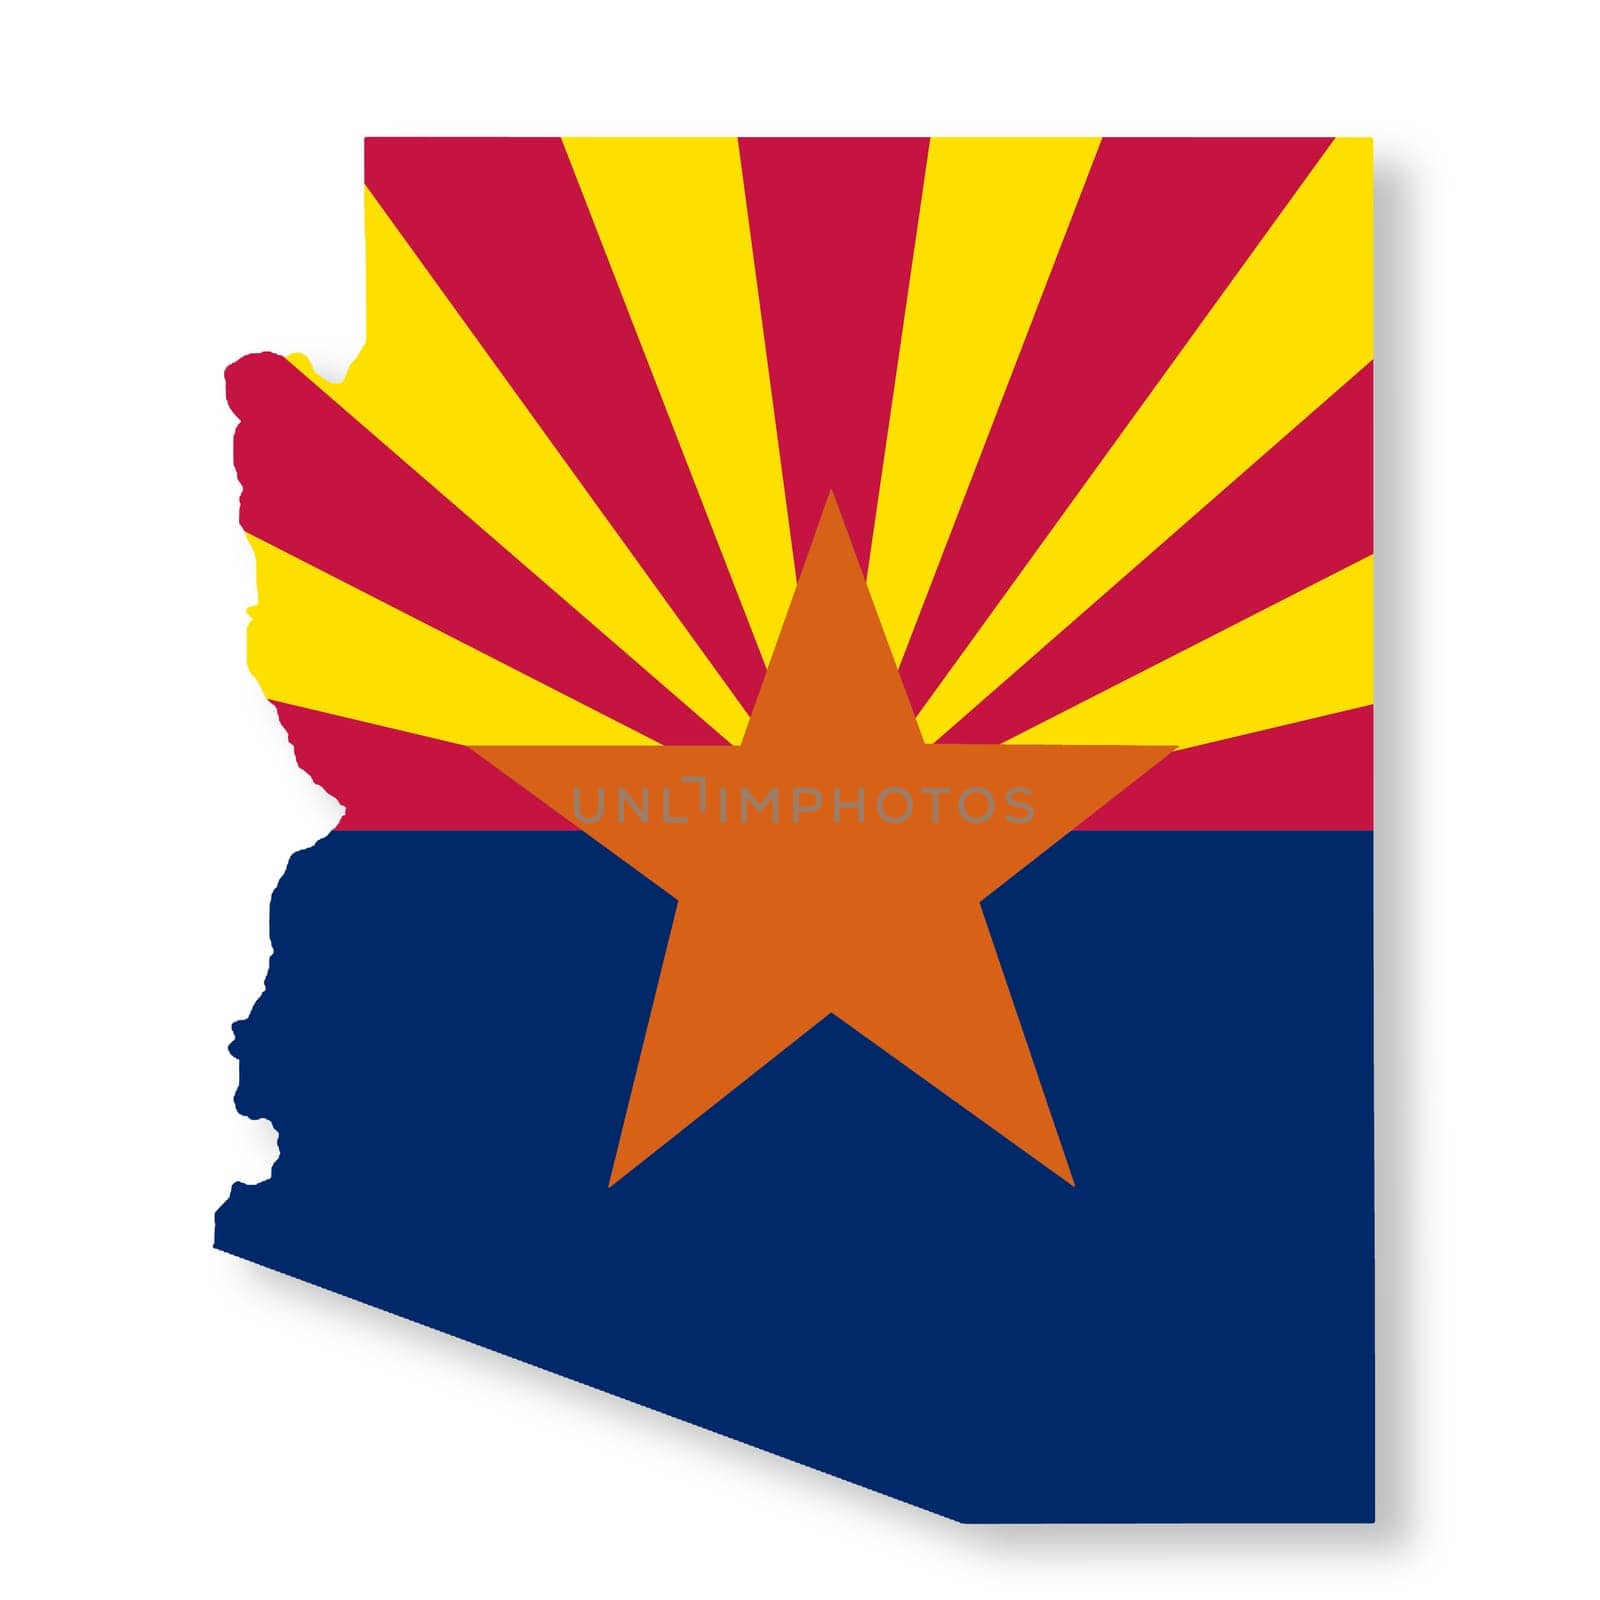 An Arizona State Flag Map Illustration with clipping path